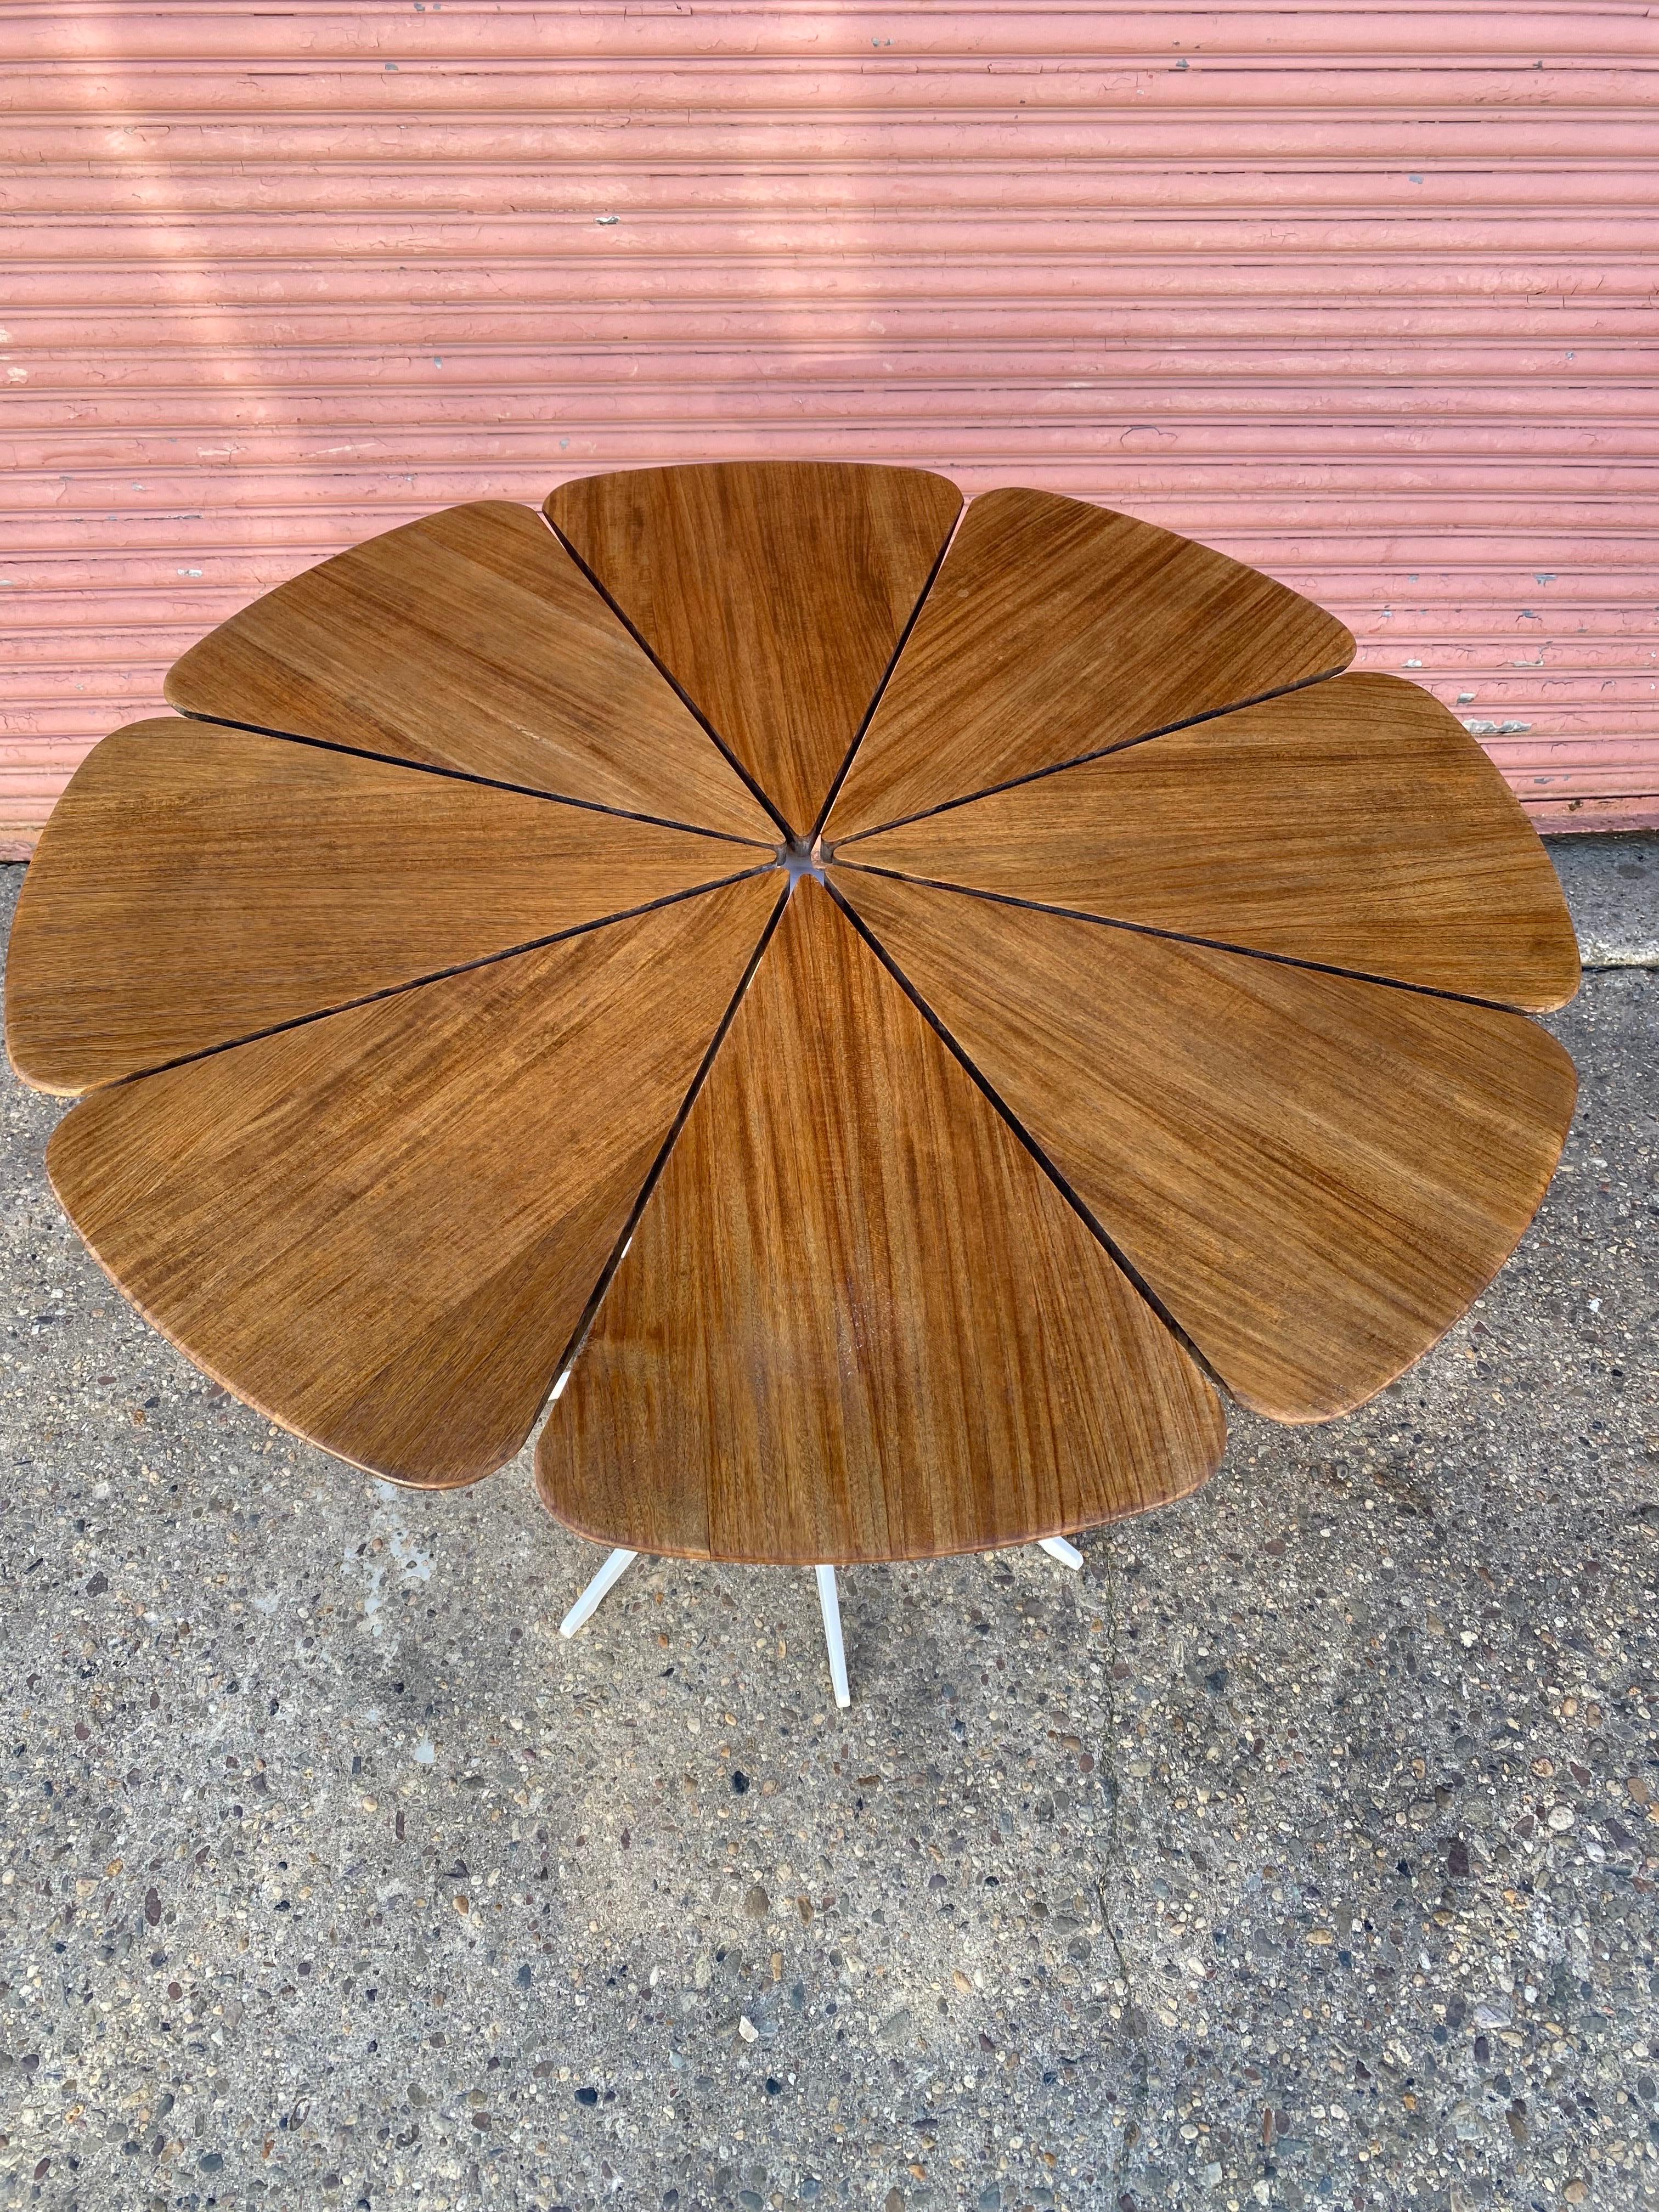 Richard Schultz for Knoll Petal Table.  1960's design, but this model dates to only a few years old.  In nice shape with just a little paint loss showing on the bottom of the pole above the base.